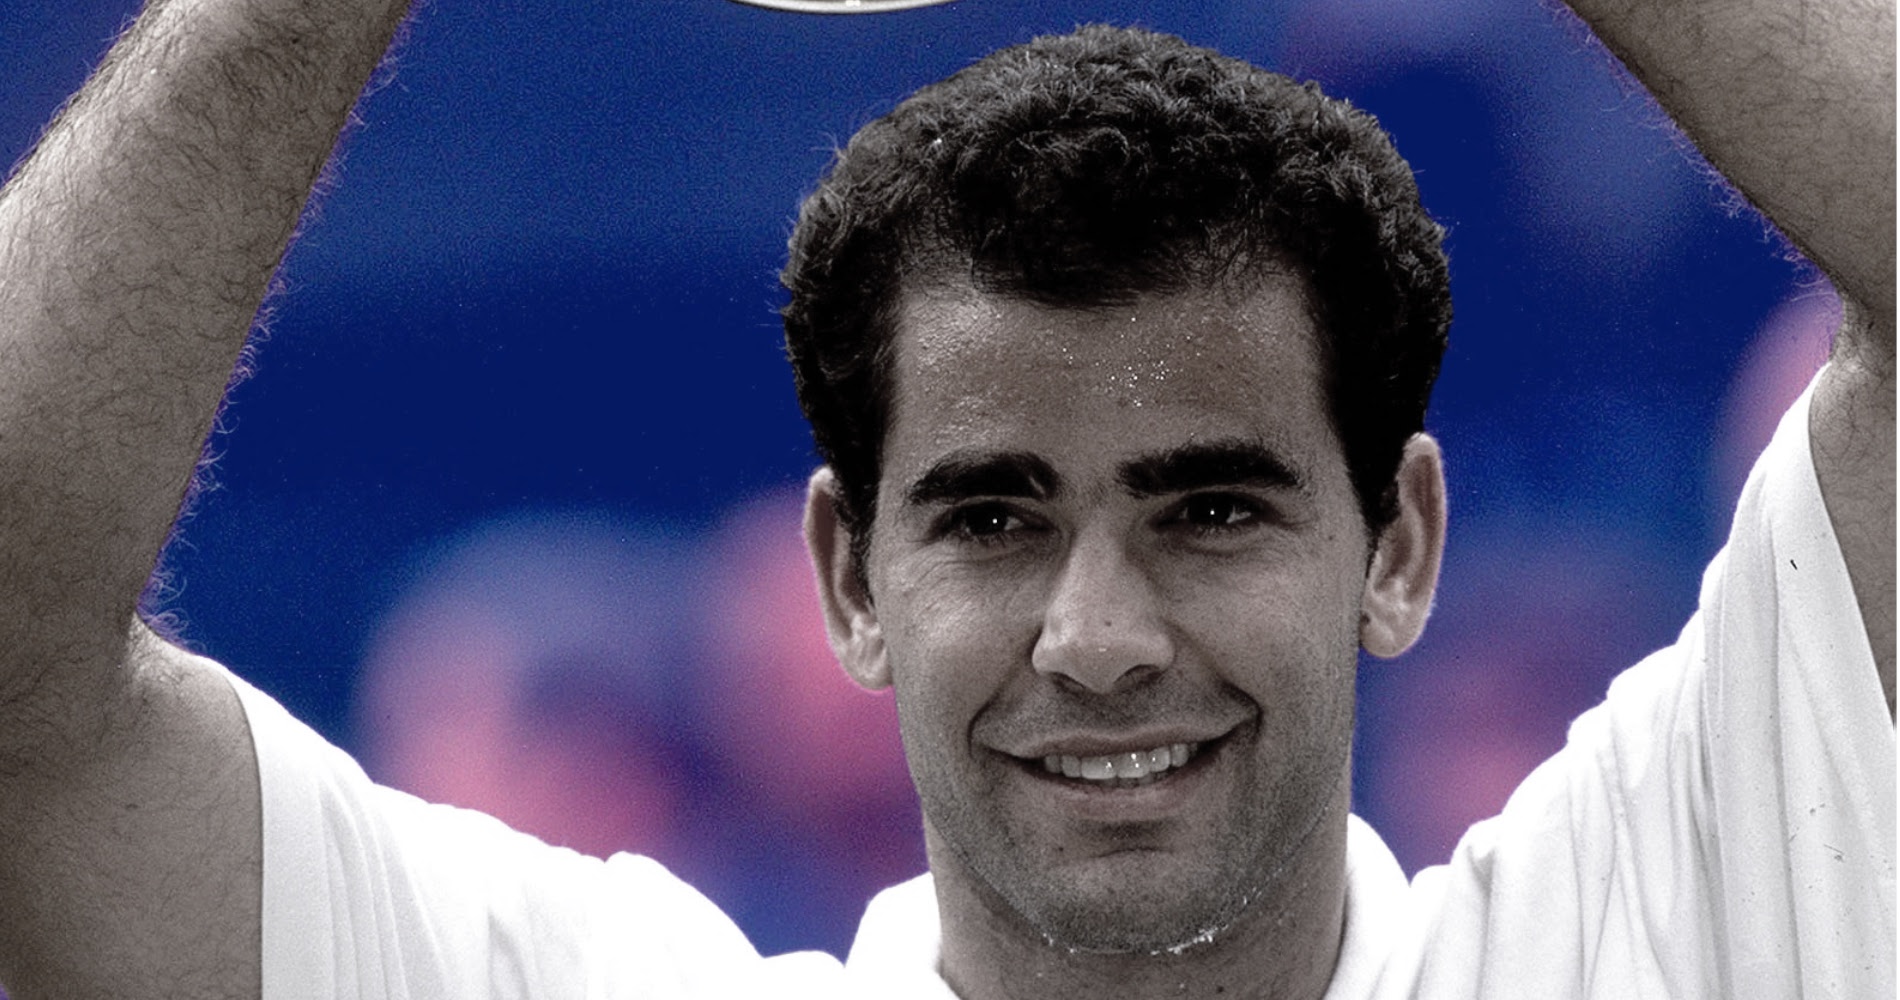 July 4 1999 The Day Pete Sampras Put On A Wimbledon Masterclass Againt Agassi His Life Ling Rival